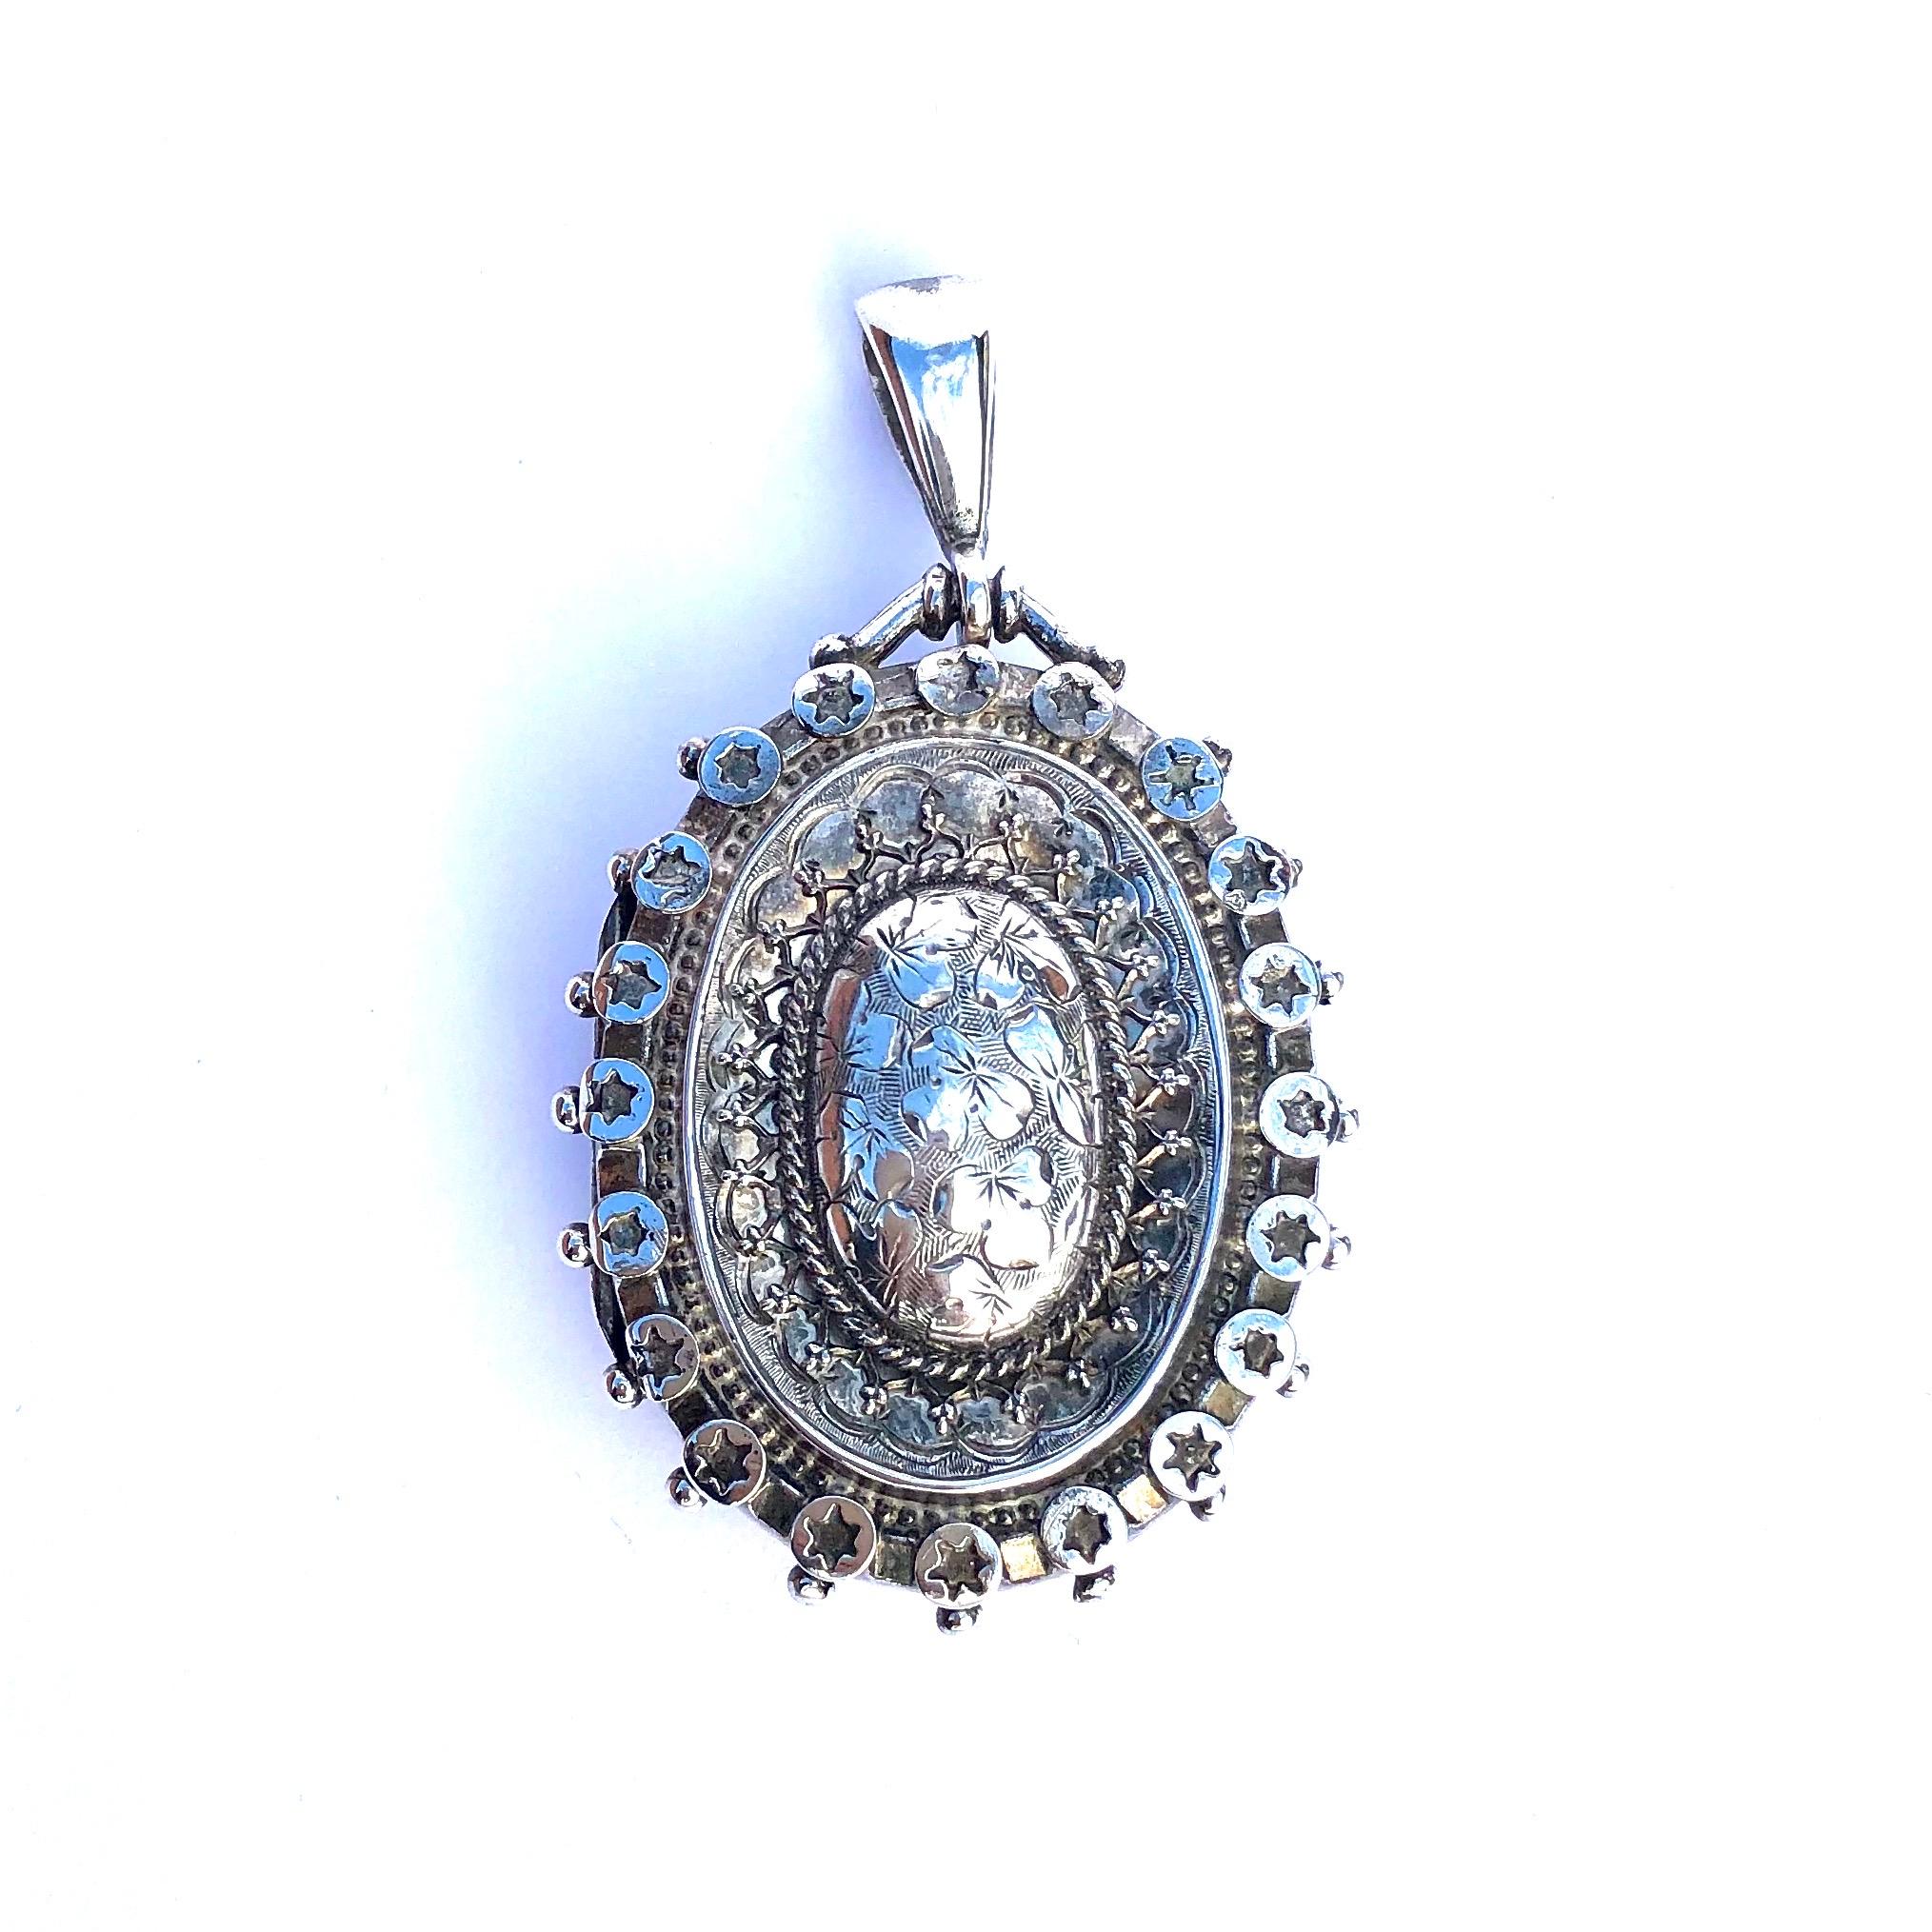 This locket couldn't have any more detail! There is beautiful star moulded frame with beaded edges, rope twist detail and proud panel with flower engraving. Inside the locket there are two portraits of smartly dressed women. Made in Birmingham,